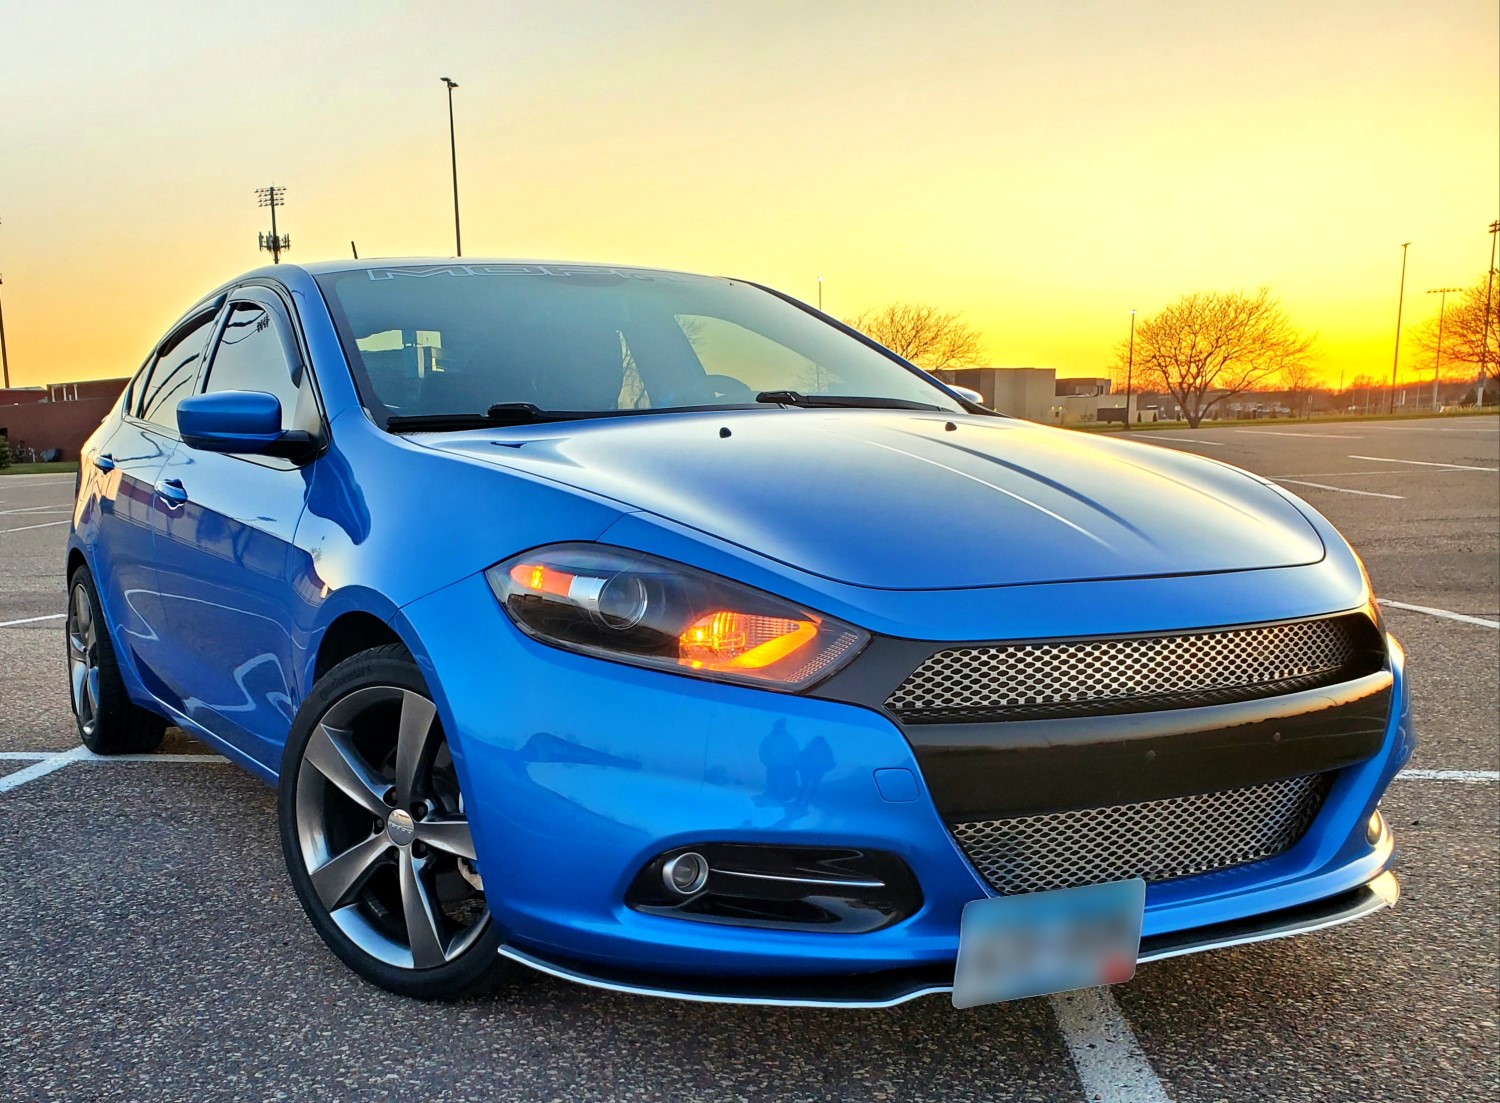 A Beautiful Sunset with a Stunning Custom Grille on a Dodge Dart